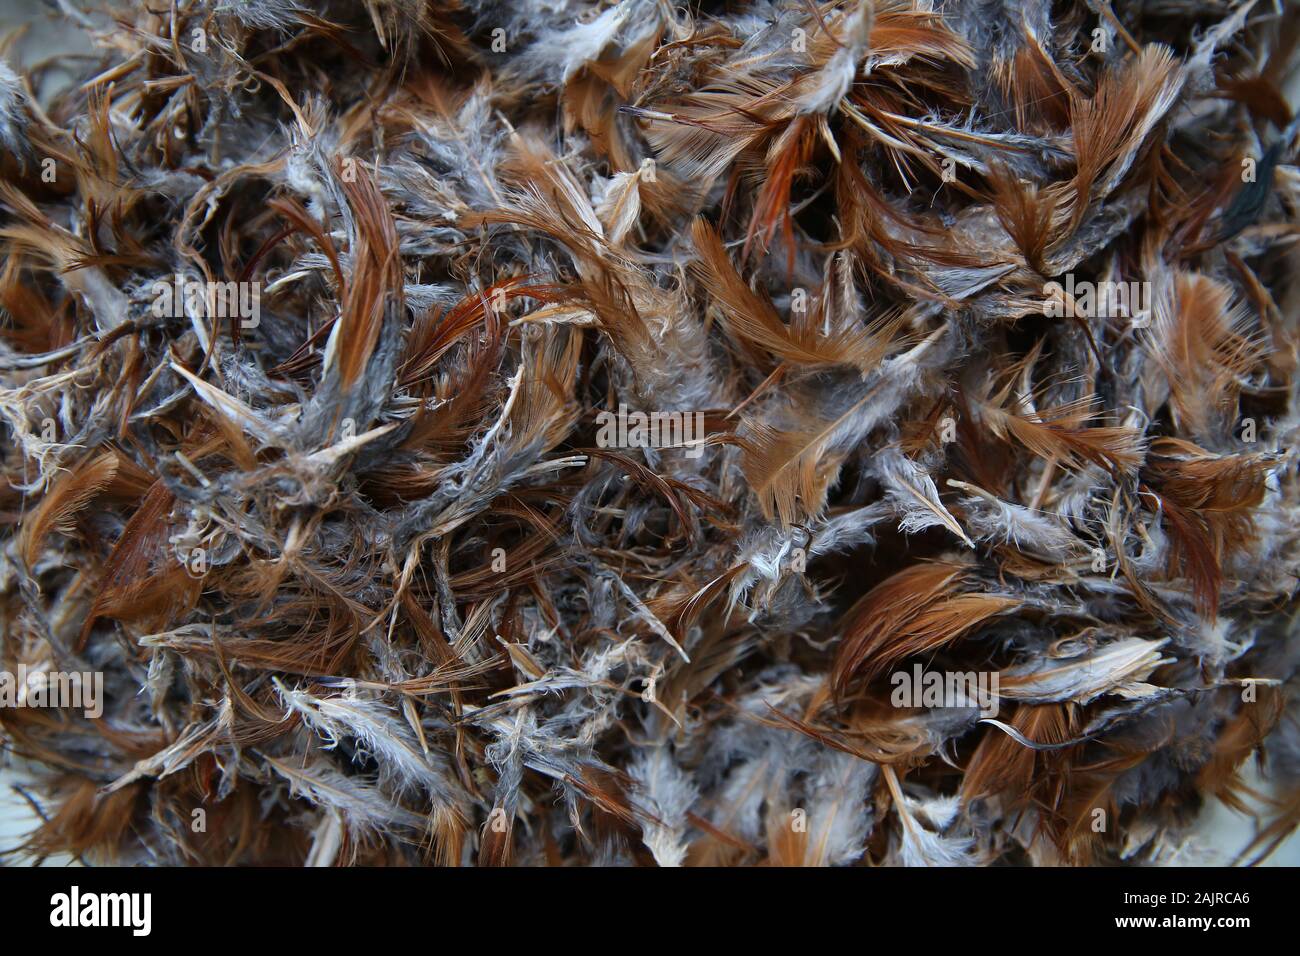 https://c8.alamy.com/comp/2AJRCA6/huge-collection-of-brown-chicken-feathers-plumage-carpet-background-or-texture-close-up-chicken-feather-texture-for-background-2AJRCA6.jpg